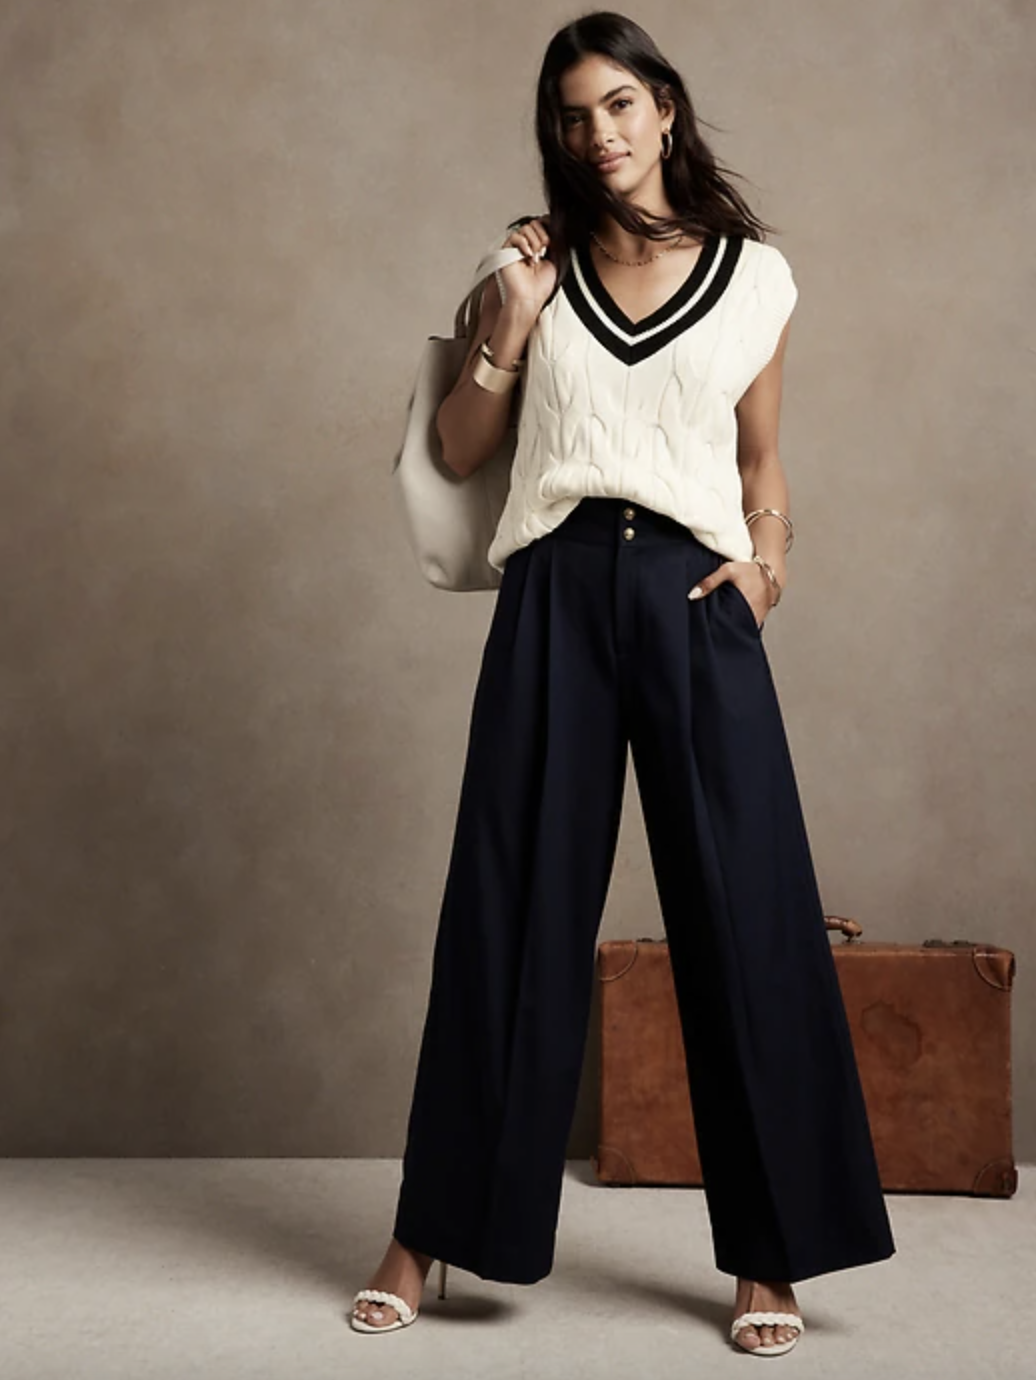 model wearing white cable knit vest and black pants